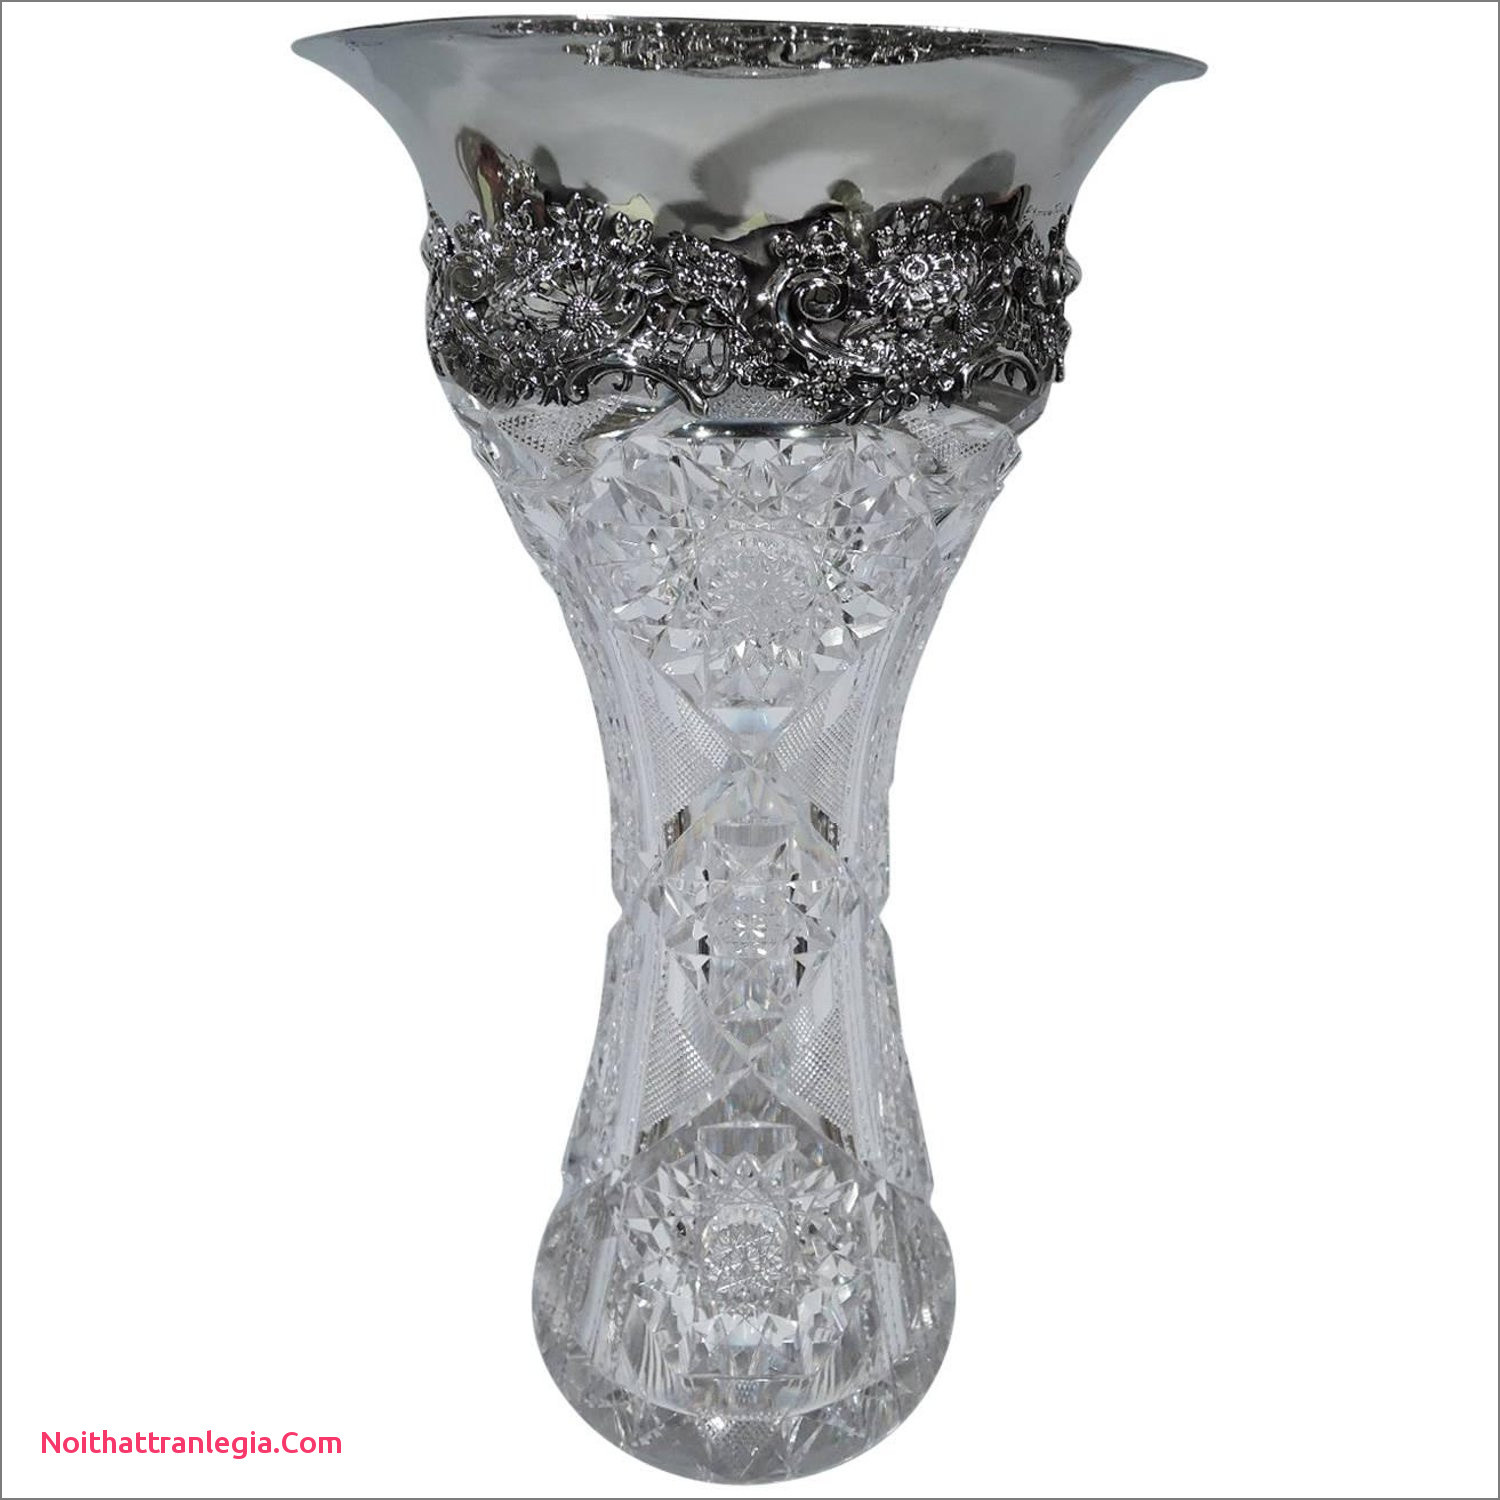 glitter vases for sale of 20 cut glass antique vase noithattranlegia vases design throughout antique brilliant cut glass and sterling silver vase by redlich for sale at 1stdibs